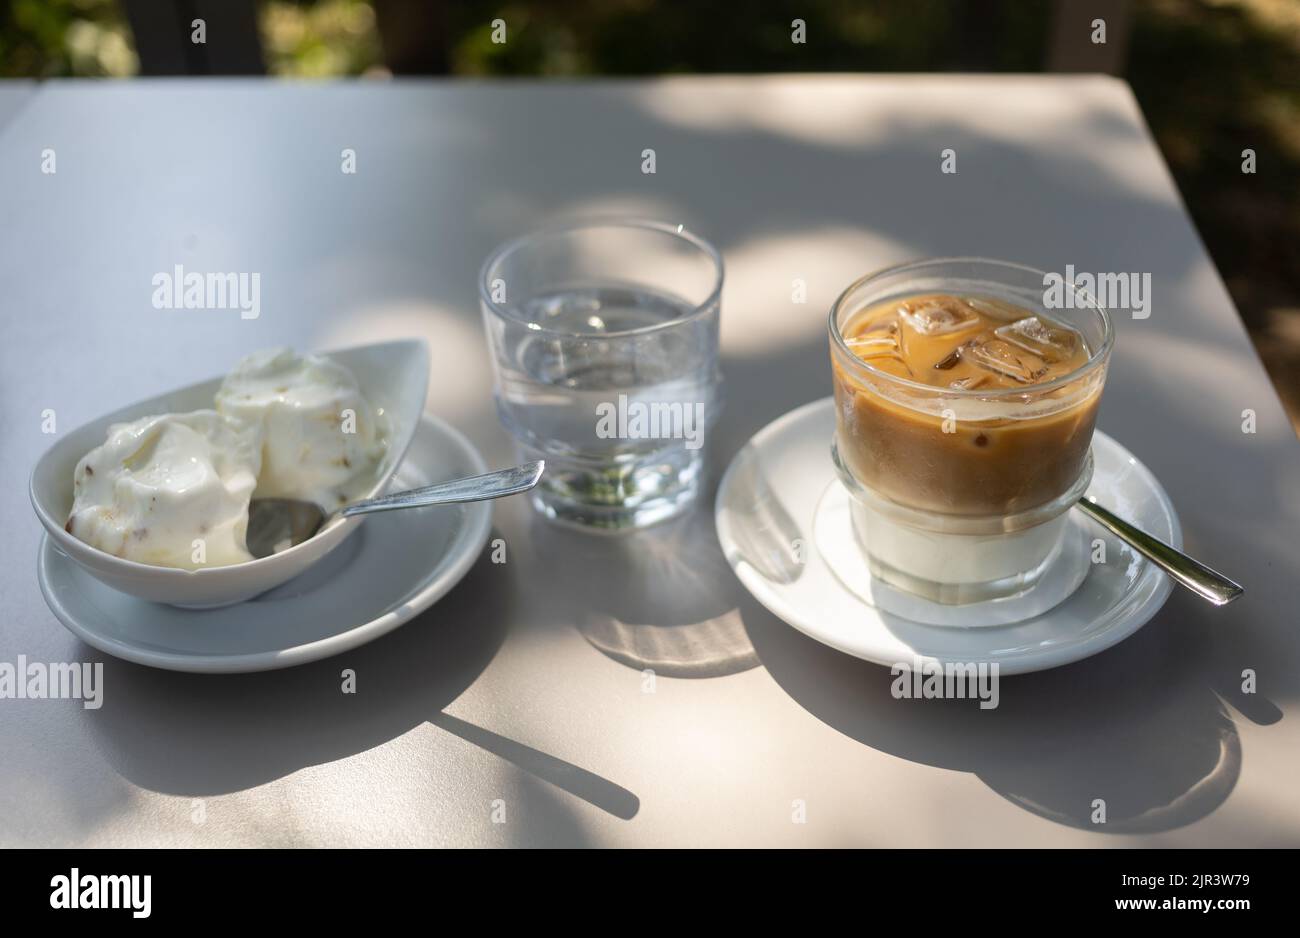 https://c8.alamy.com/comp/2JR3W79/glass-of-iced-coffee-on-the-table-at-summer-terrace-2JR3W79.jpg